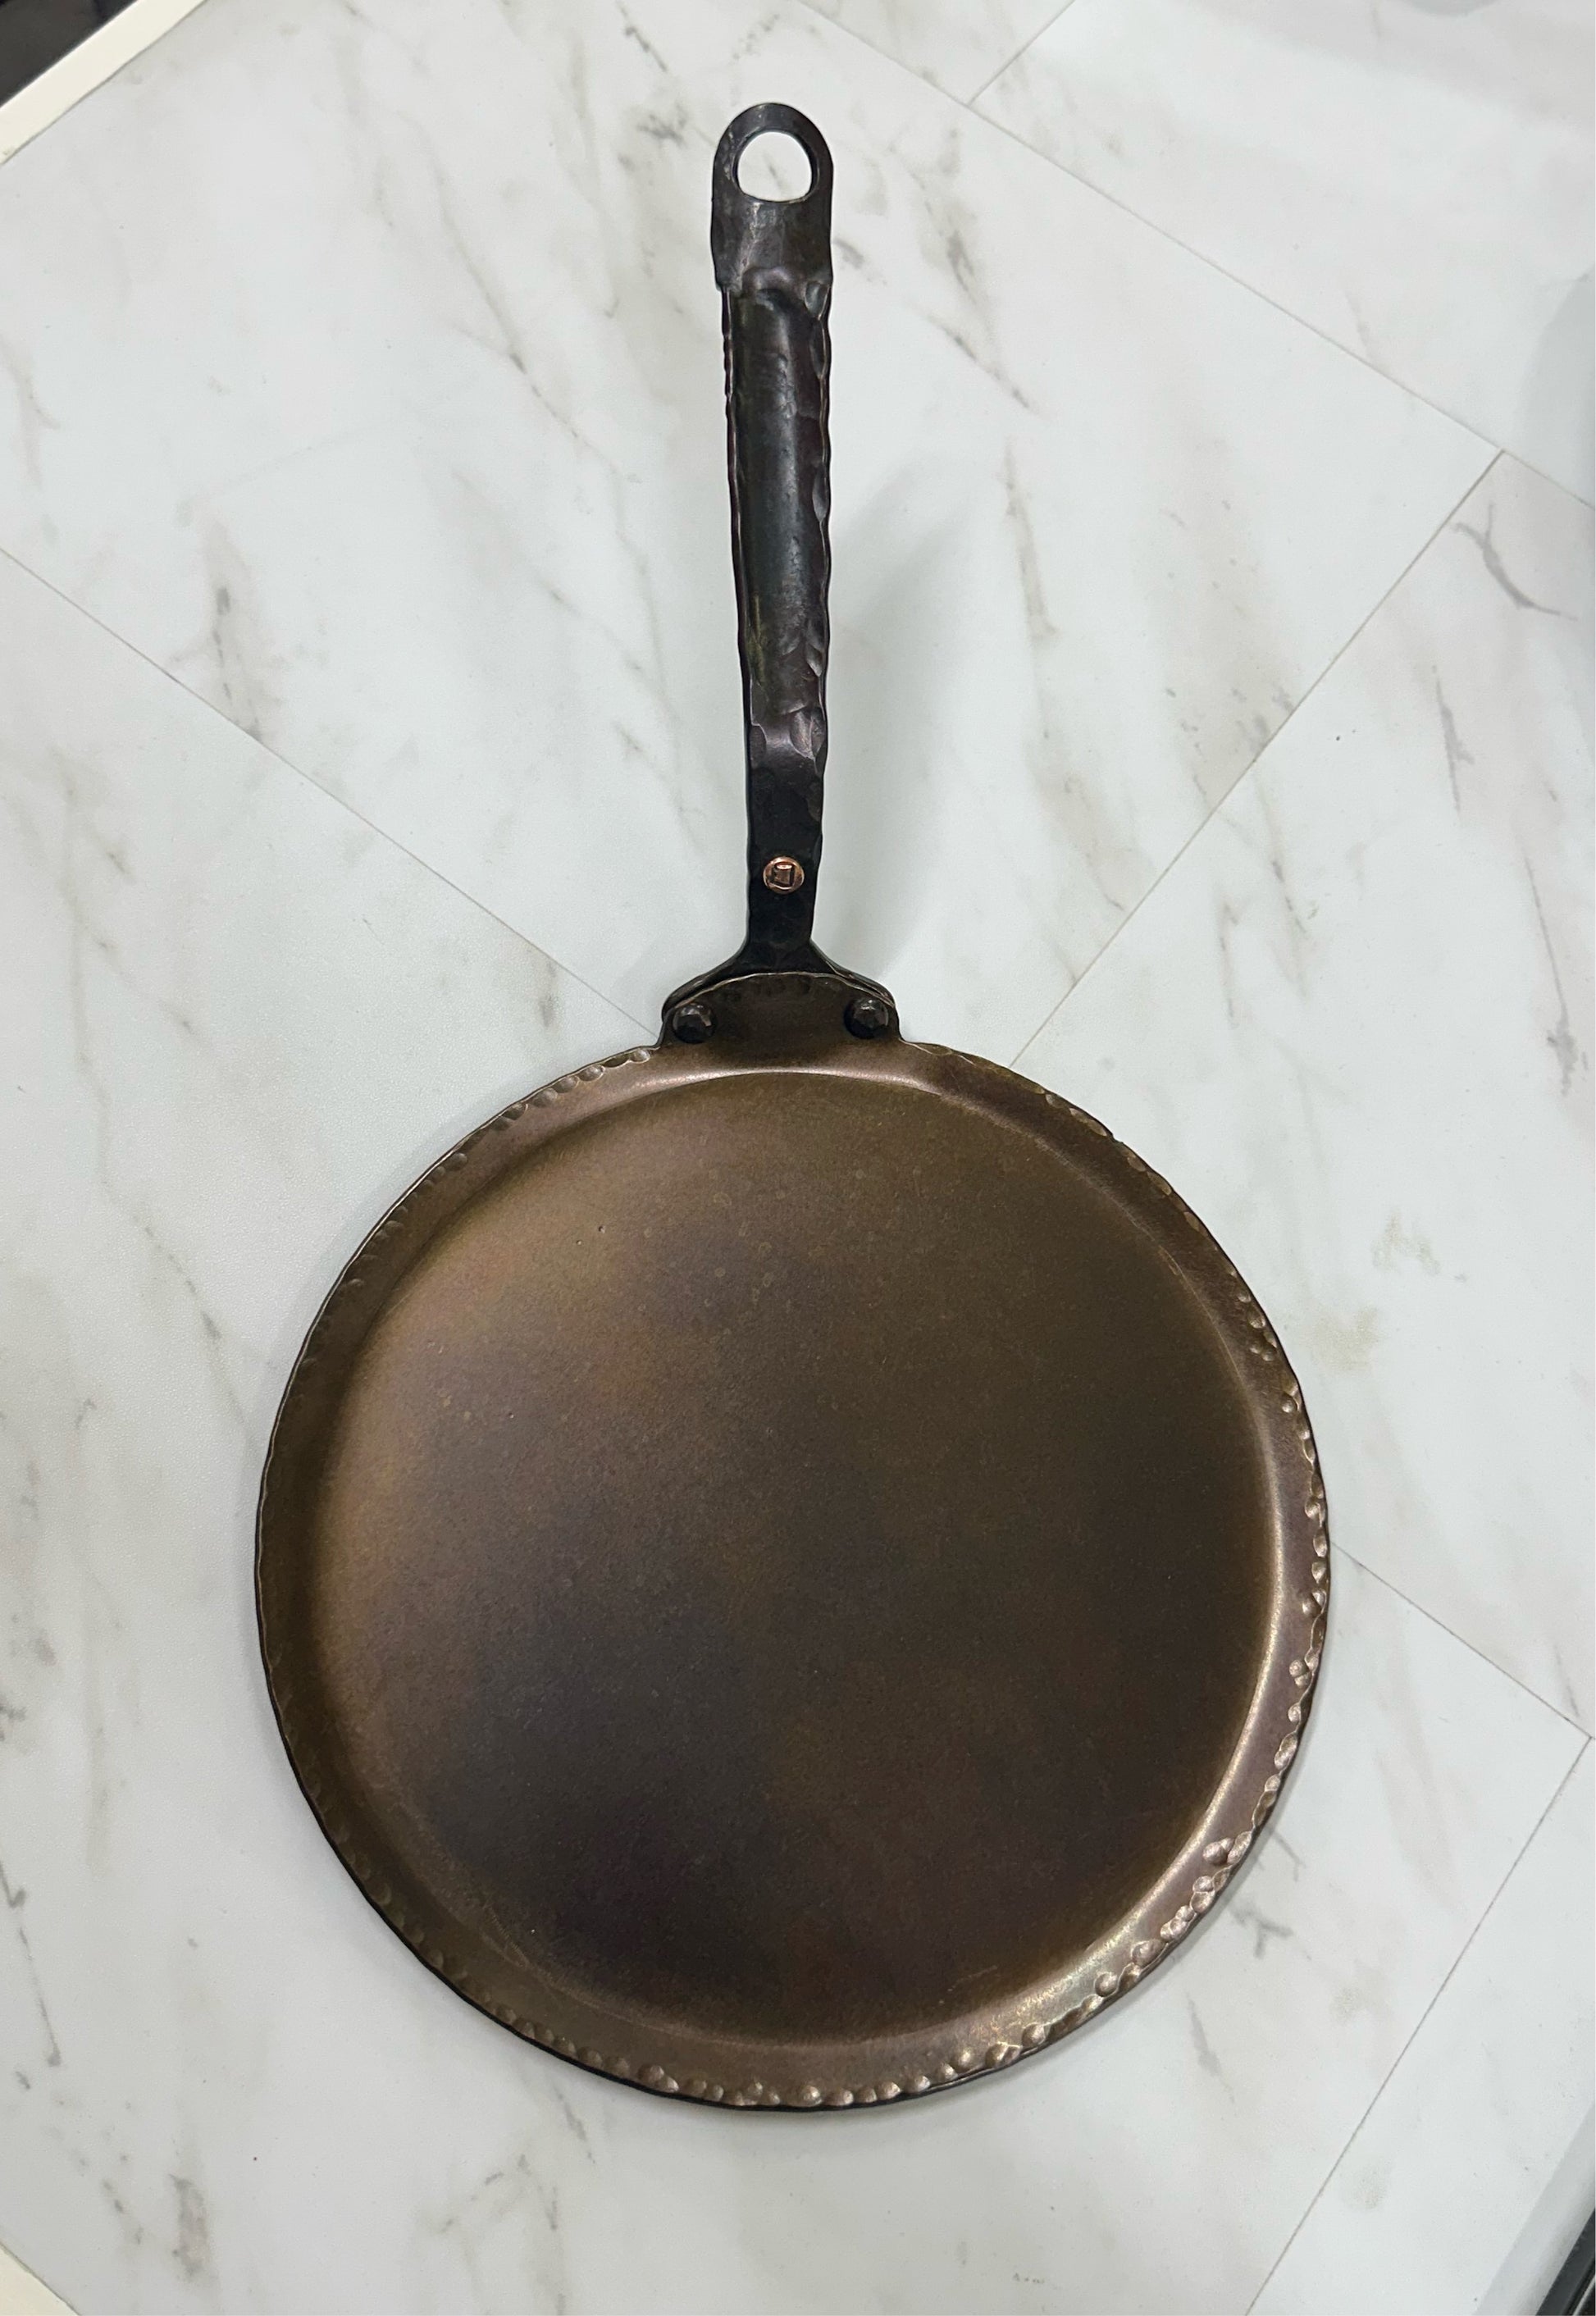 How to Release a Stuck Pancake from Your Skillet